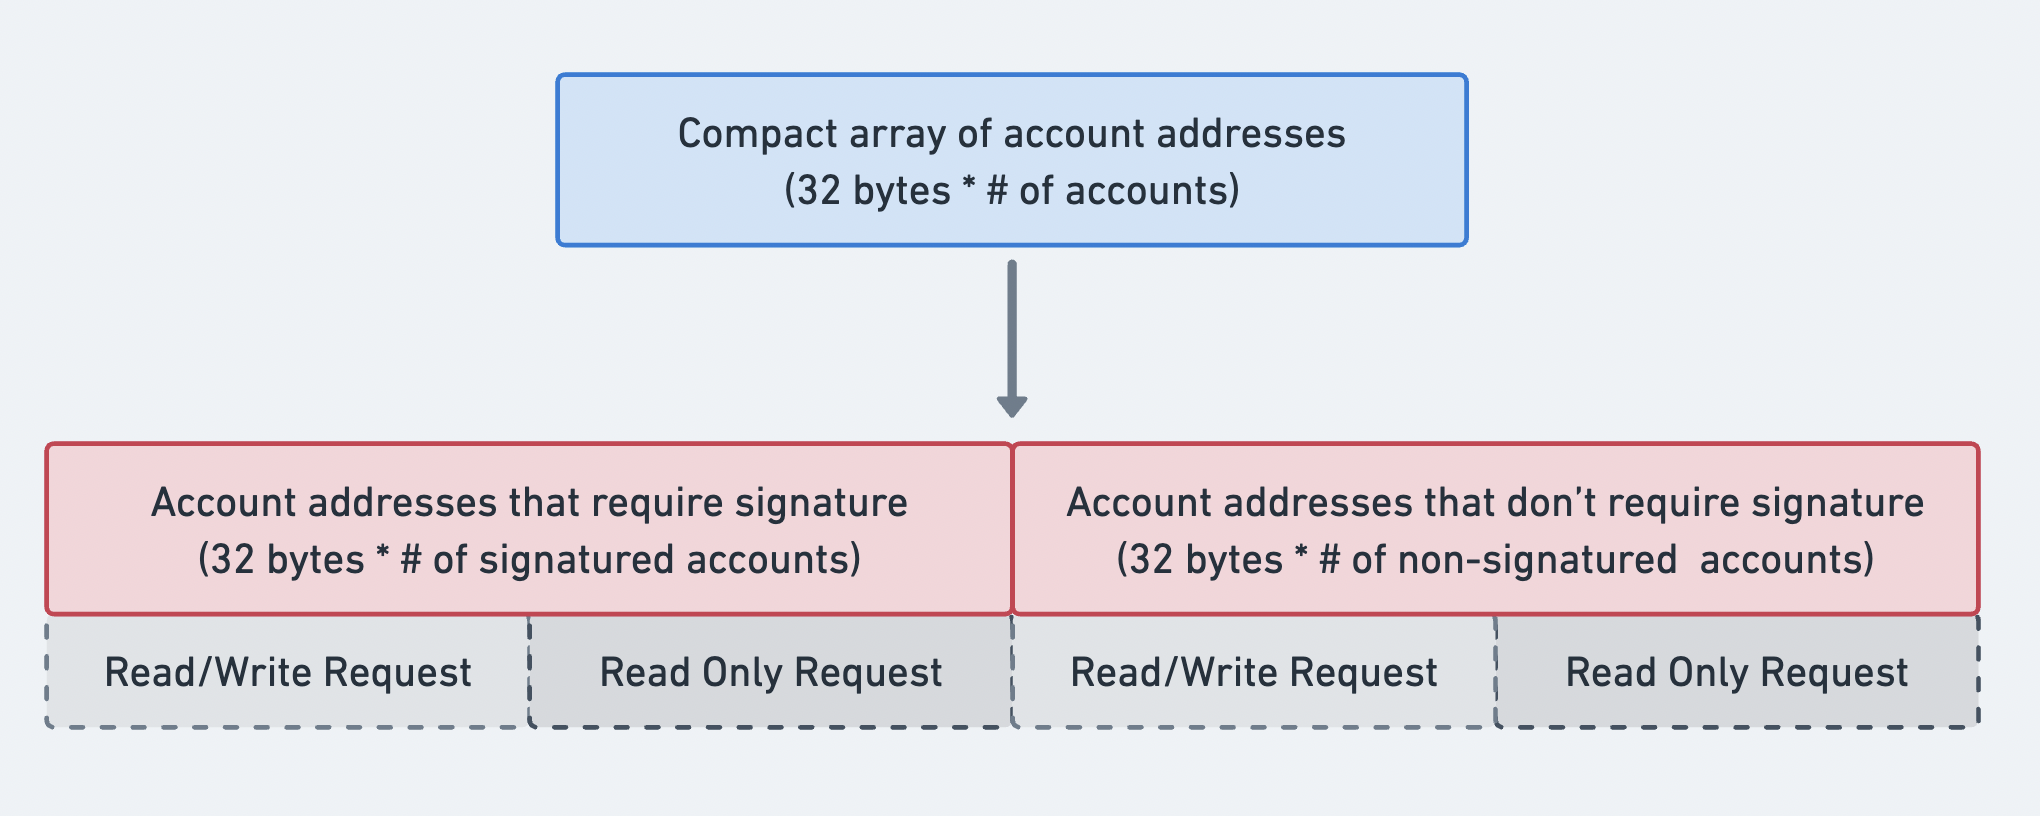 Compact array of account addresses